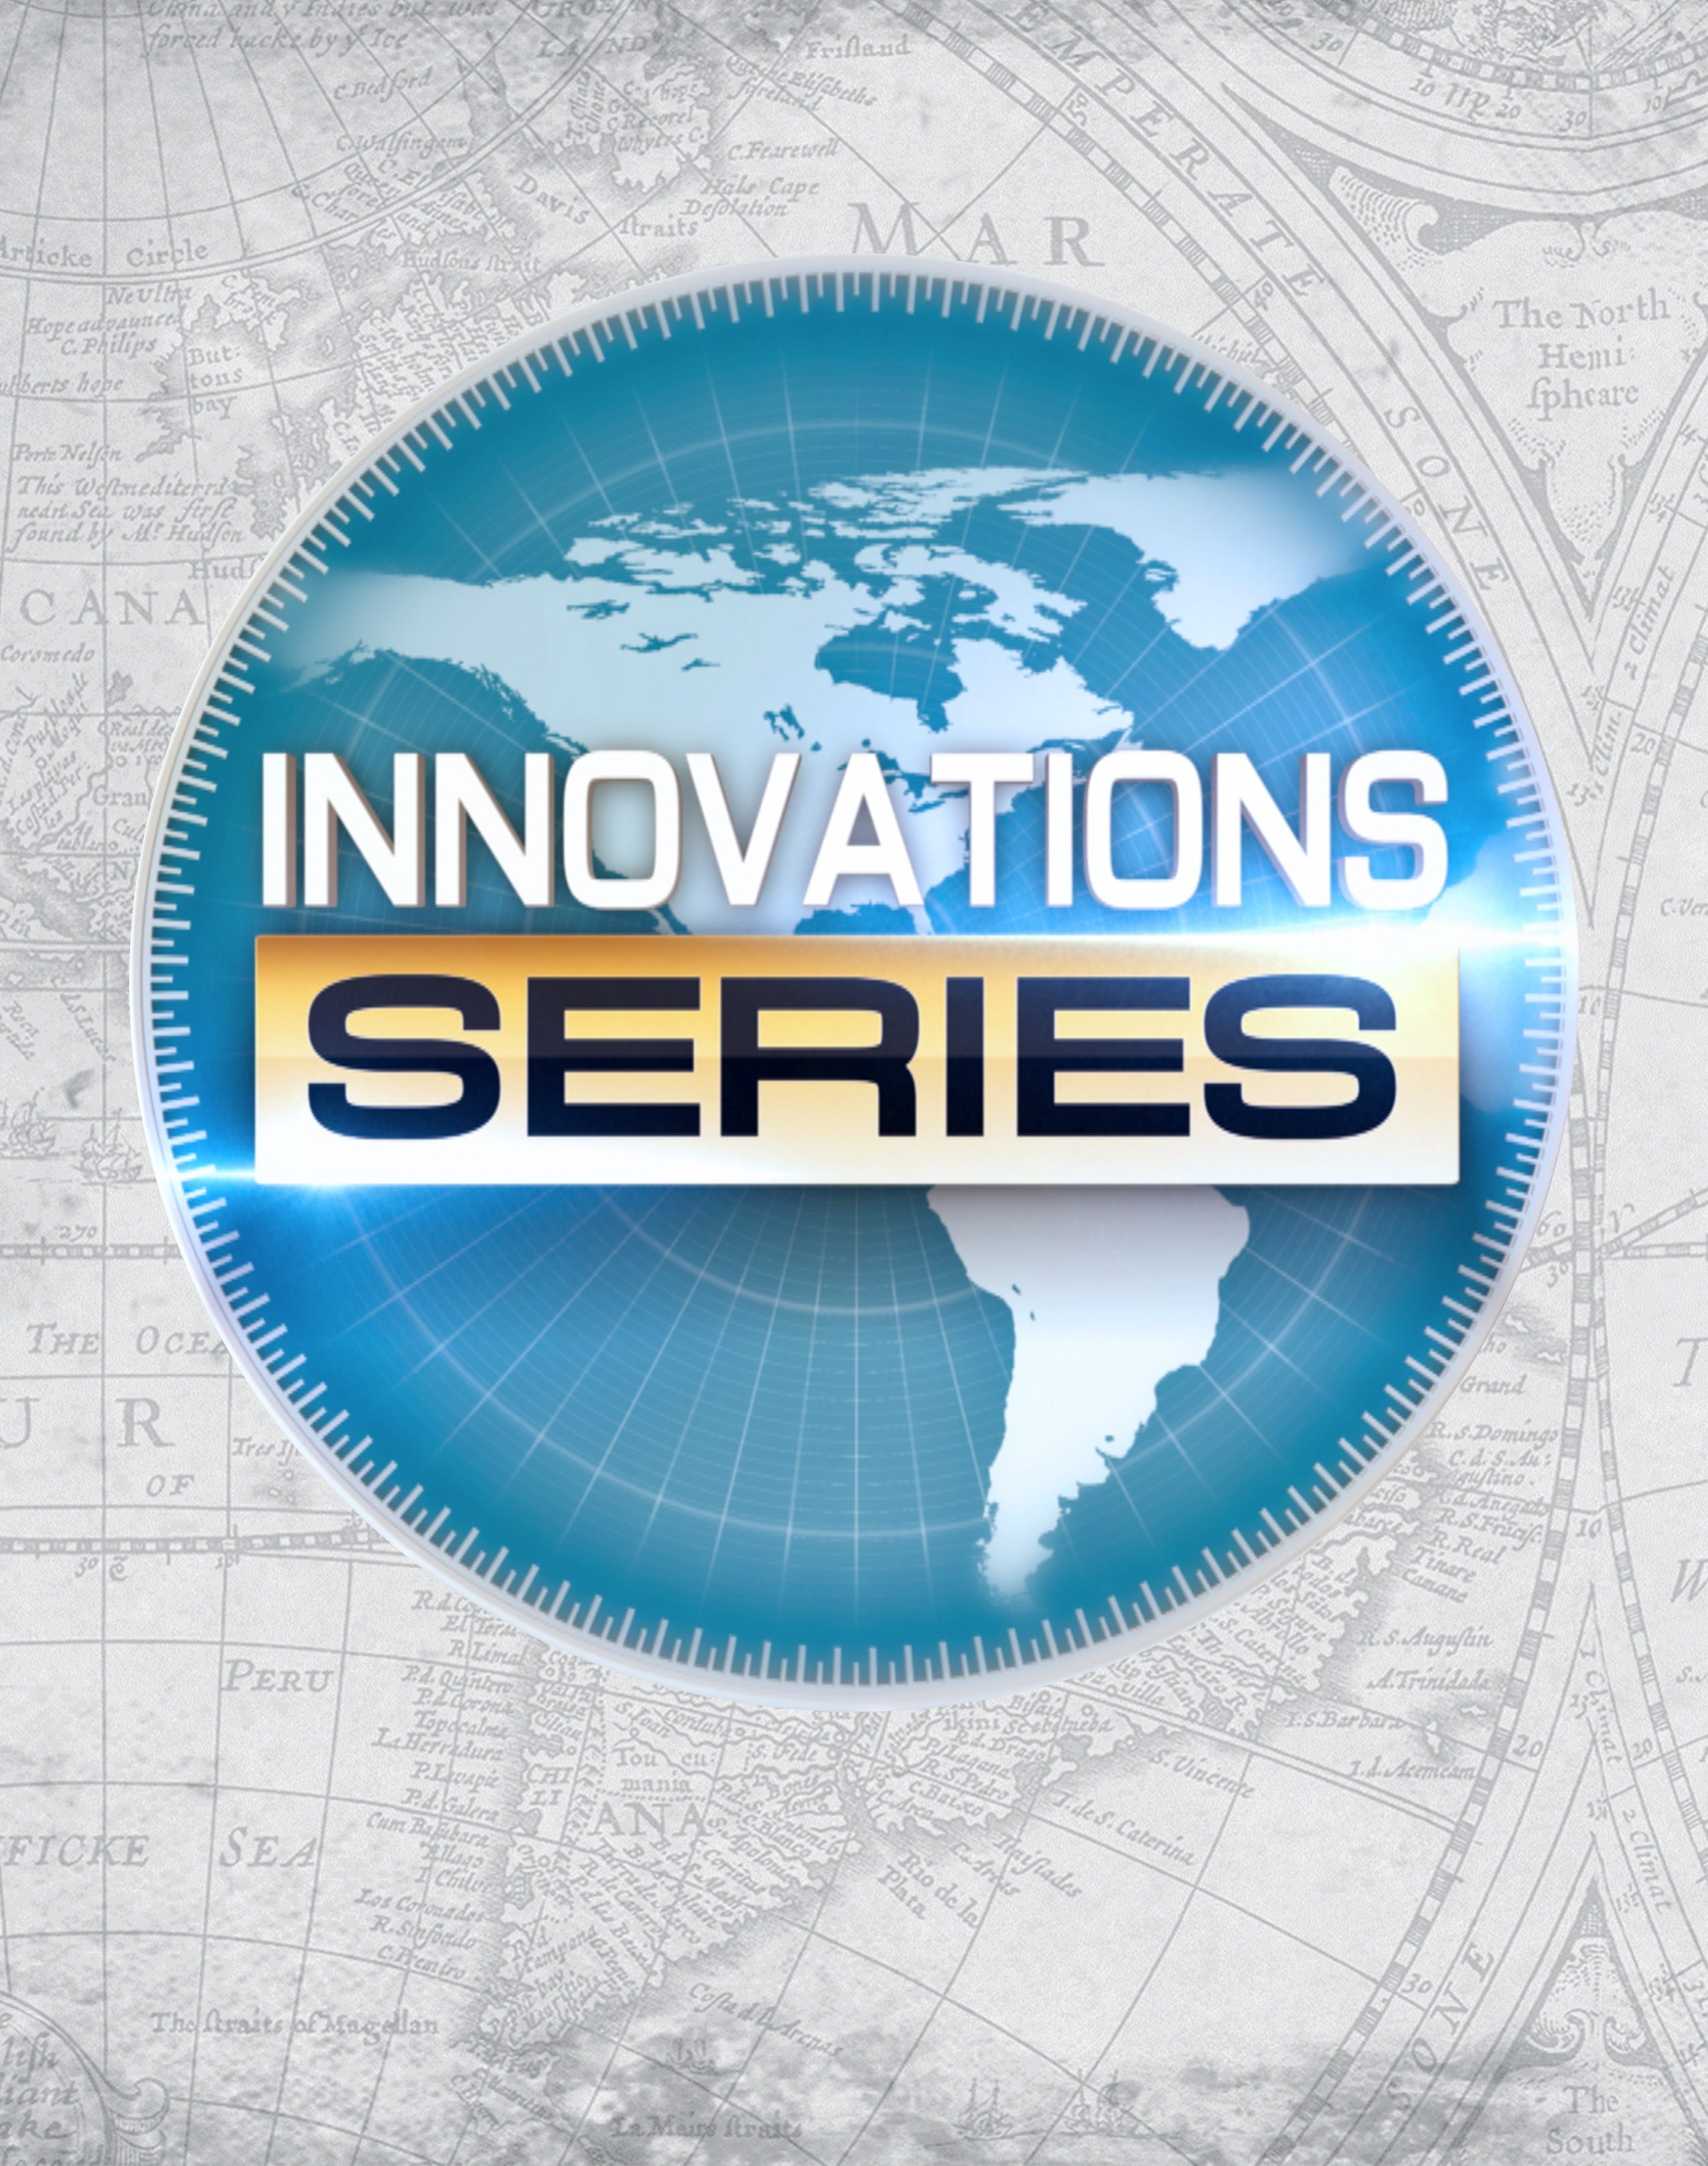 Innovations with Ed Begley Jr